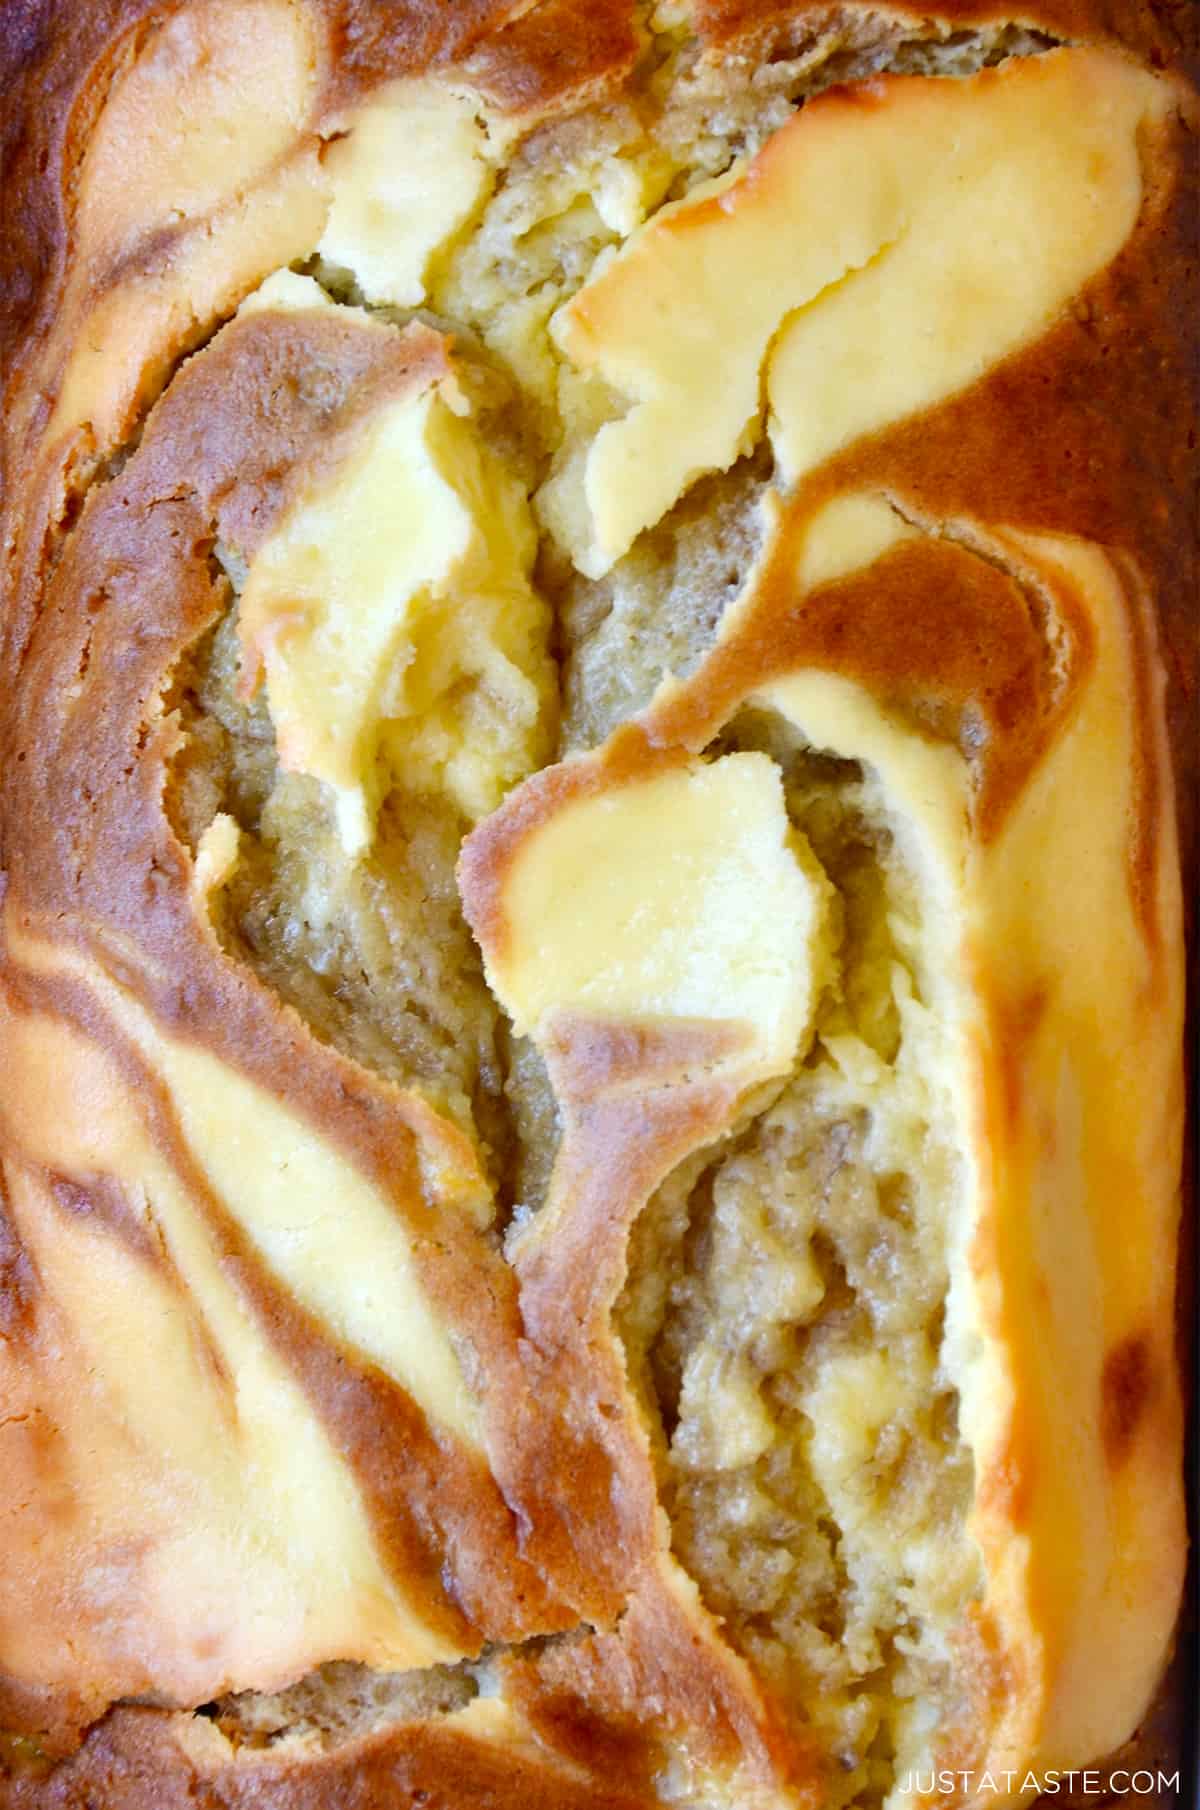 Banana bread marbled with cream cheese.